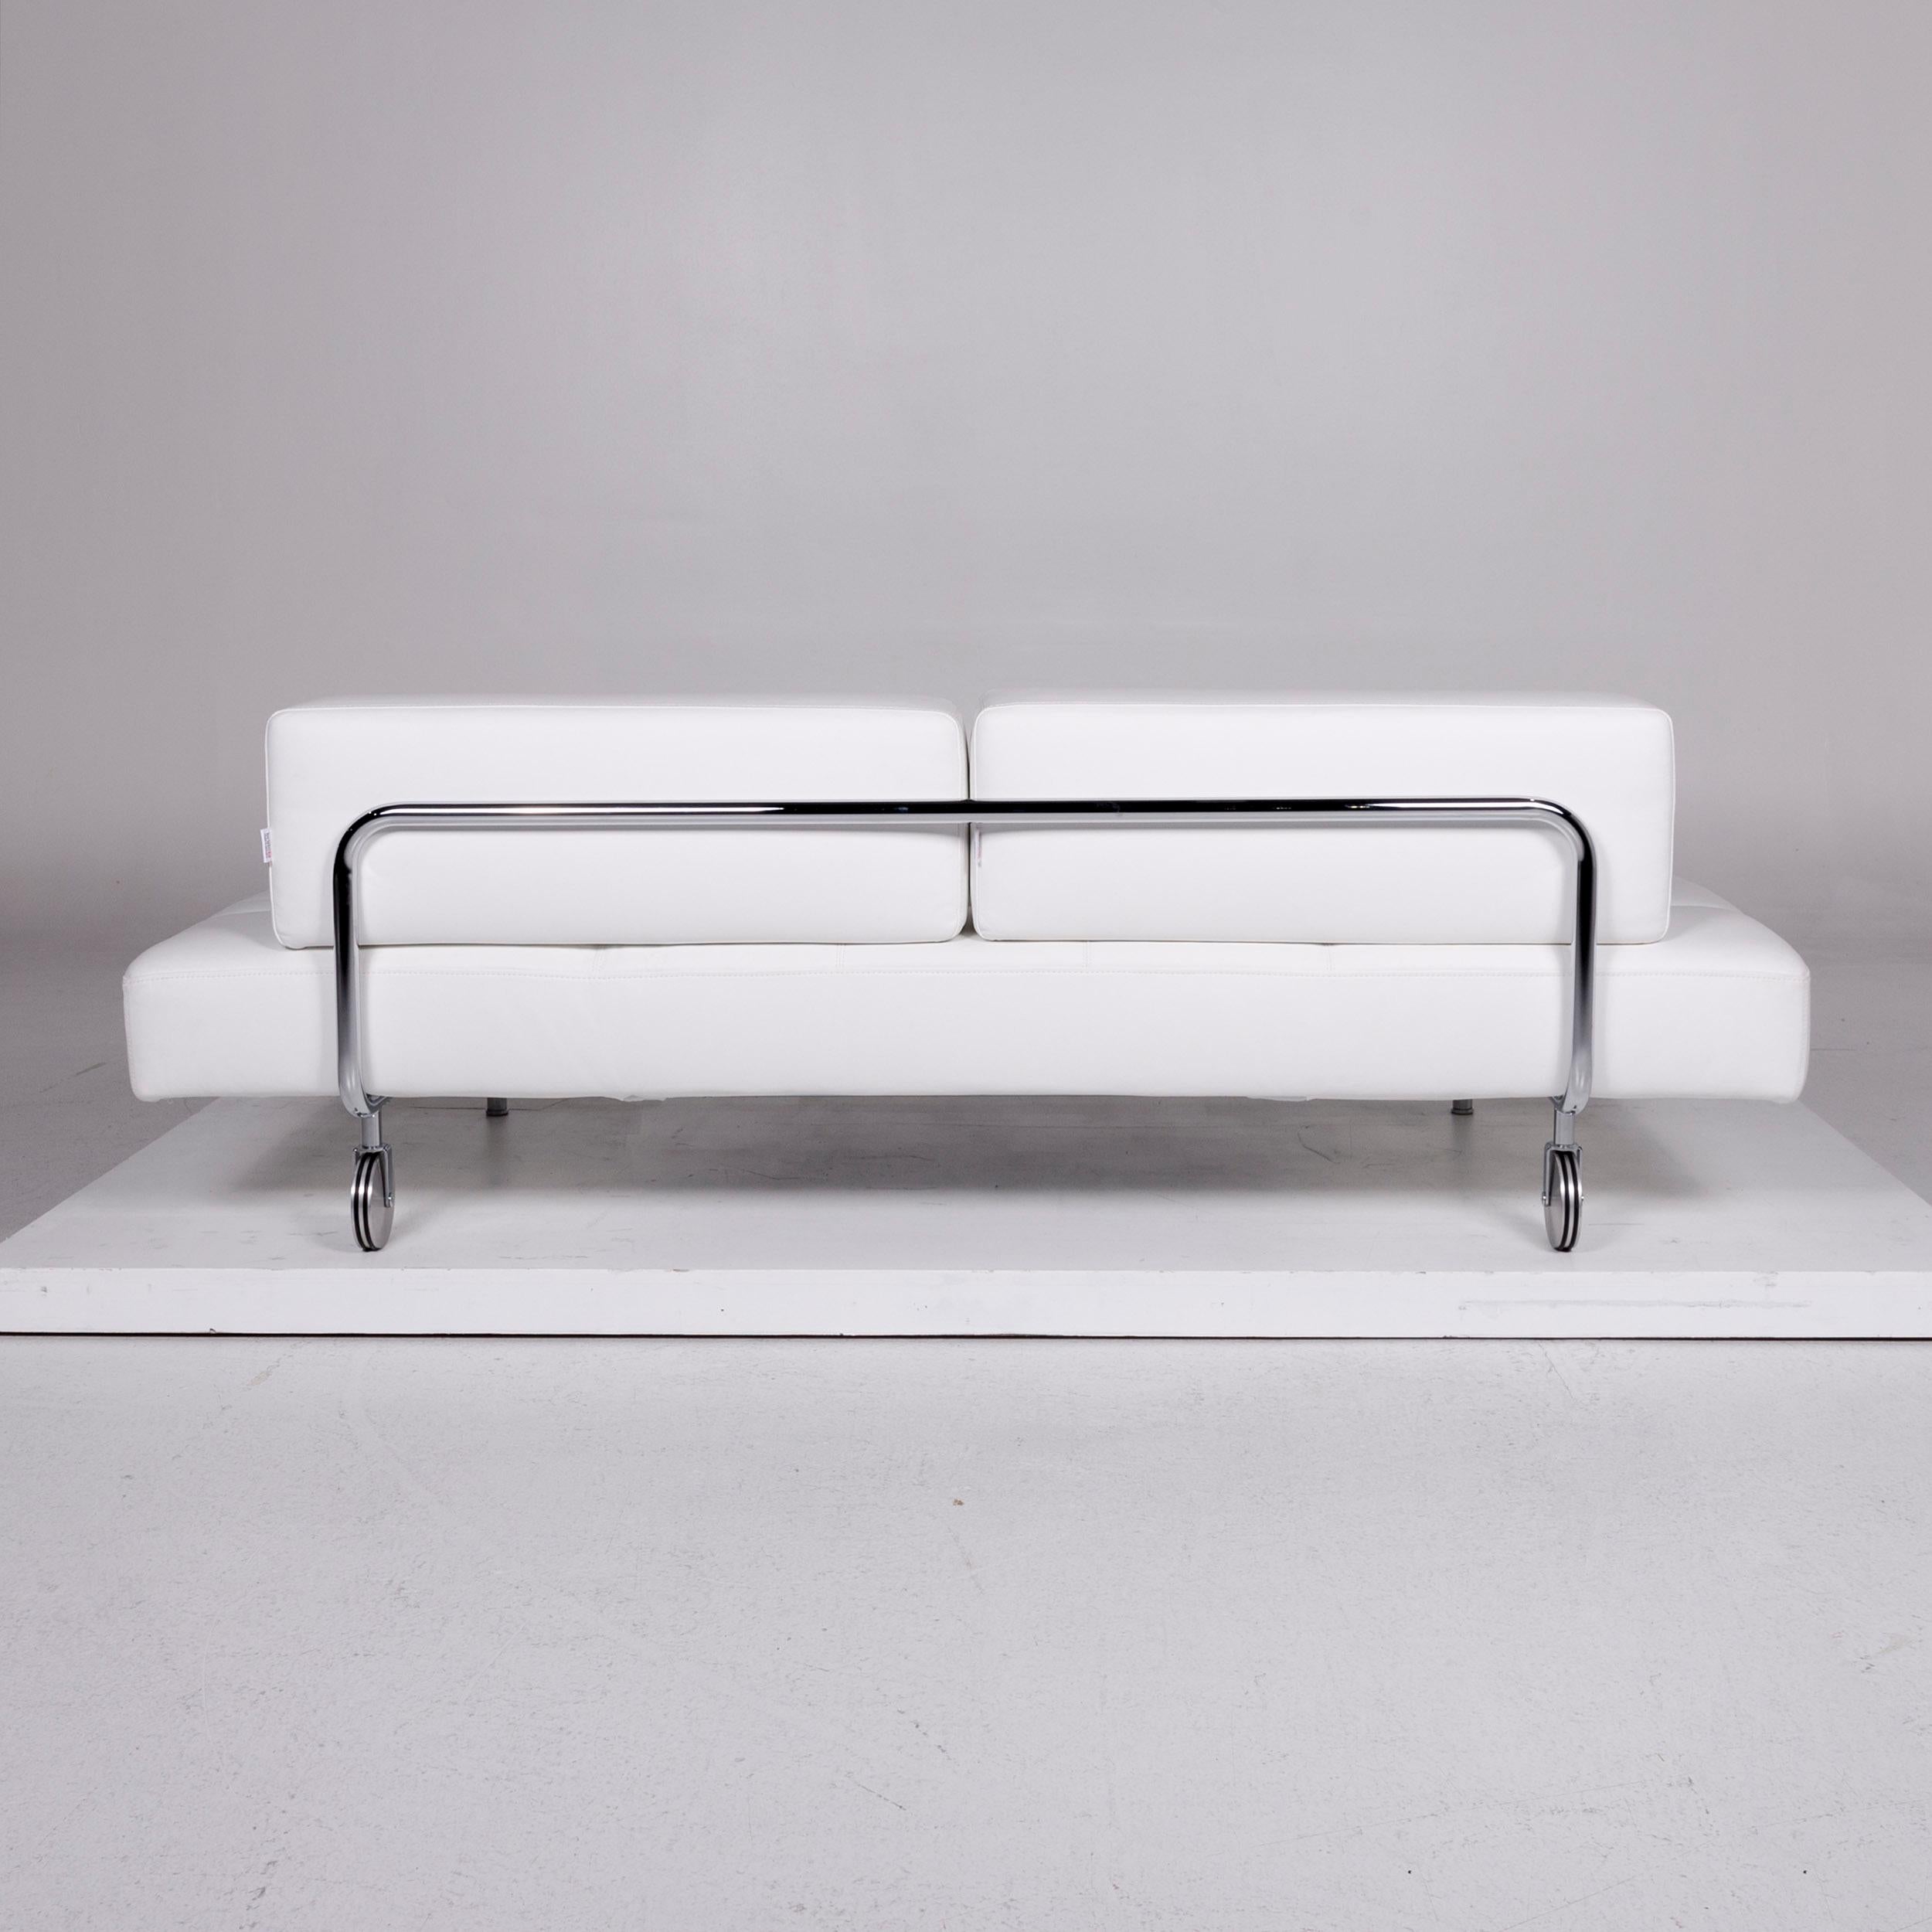 Brühl & Sippold Jerry Leather Sofa White Three-Seat Function Relaxation Couch 5